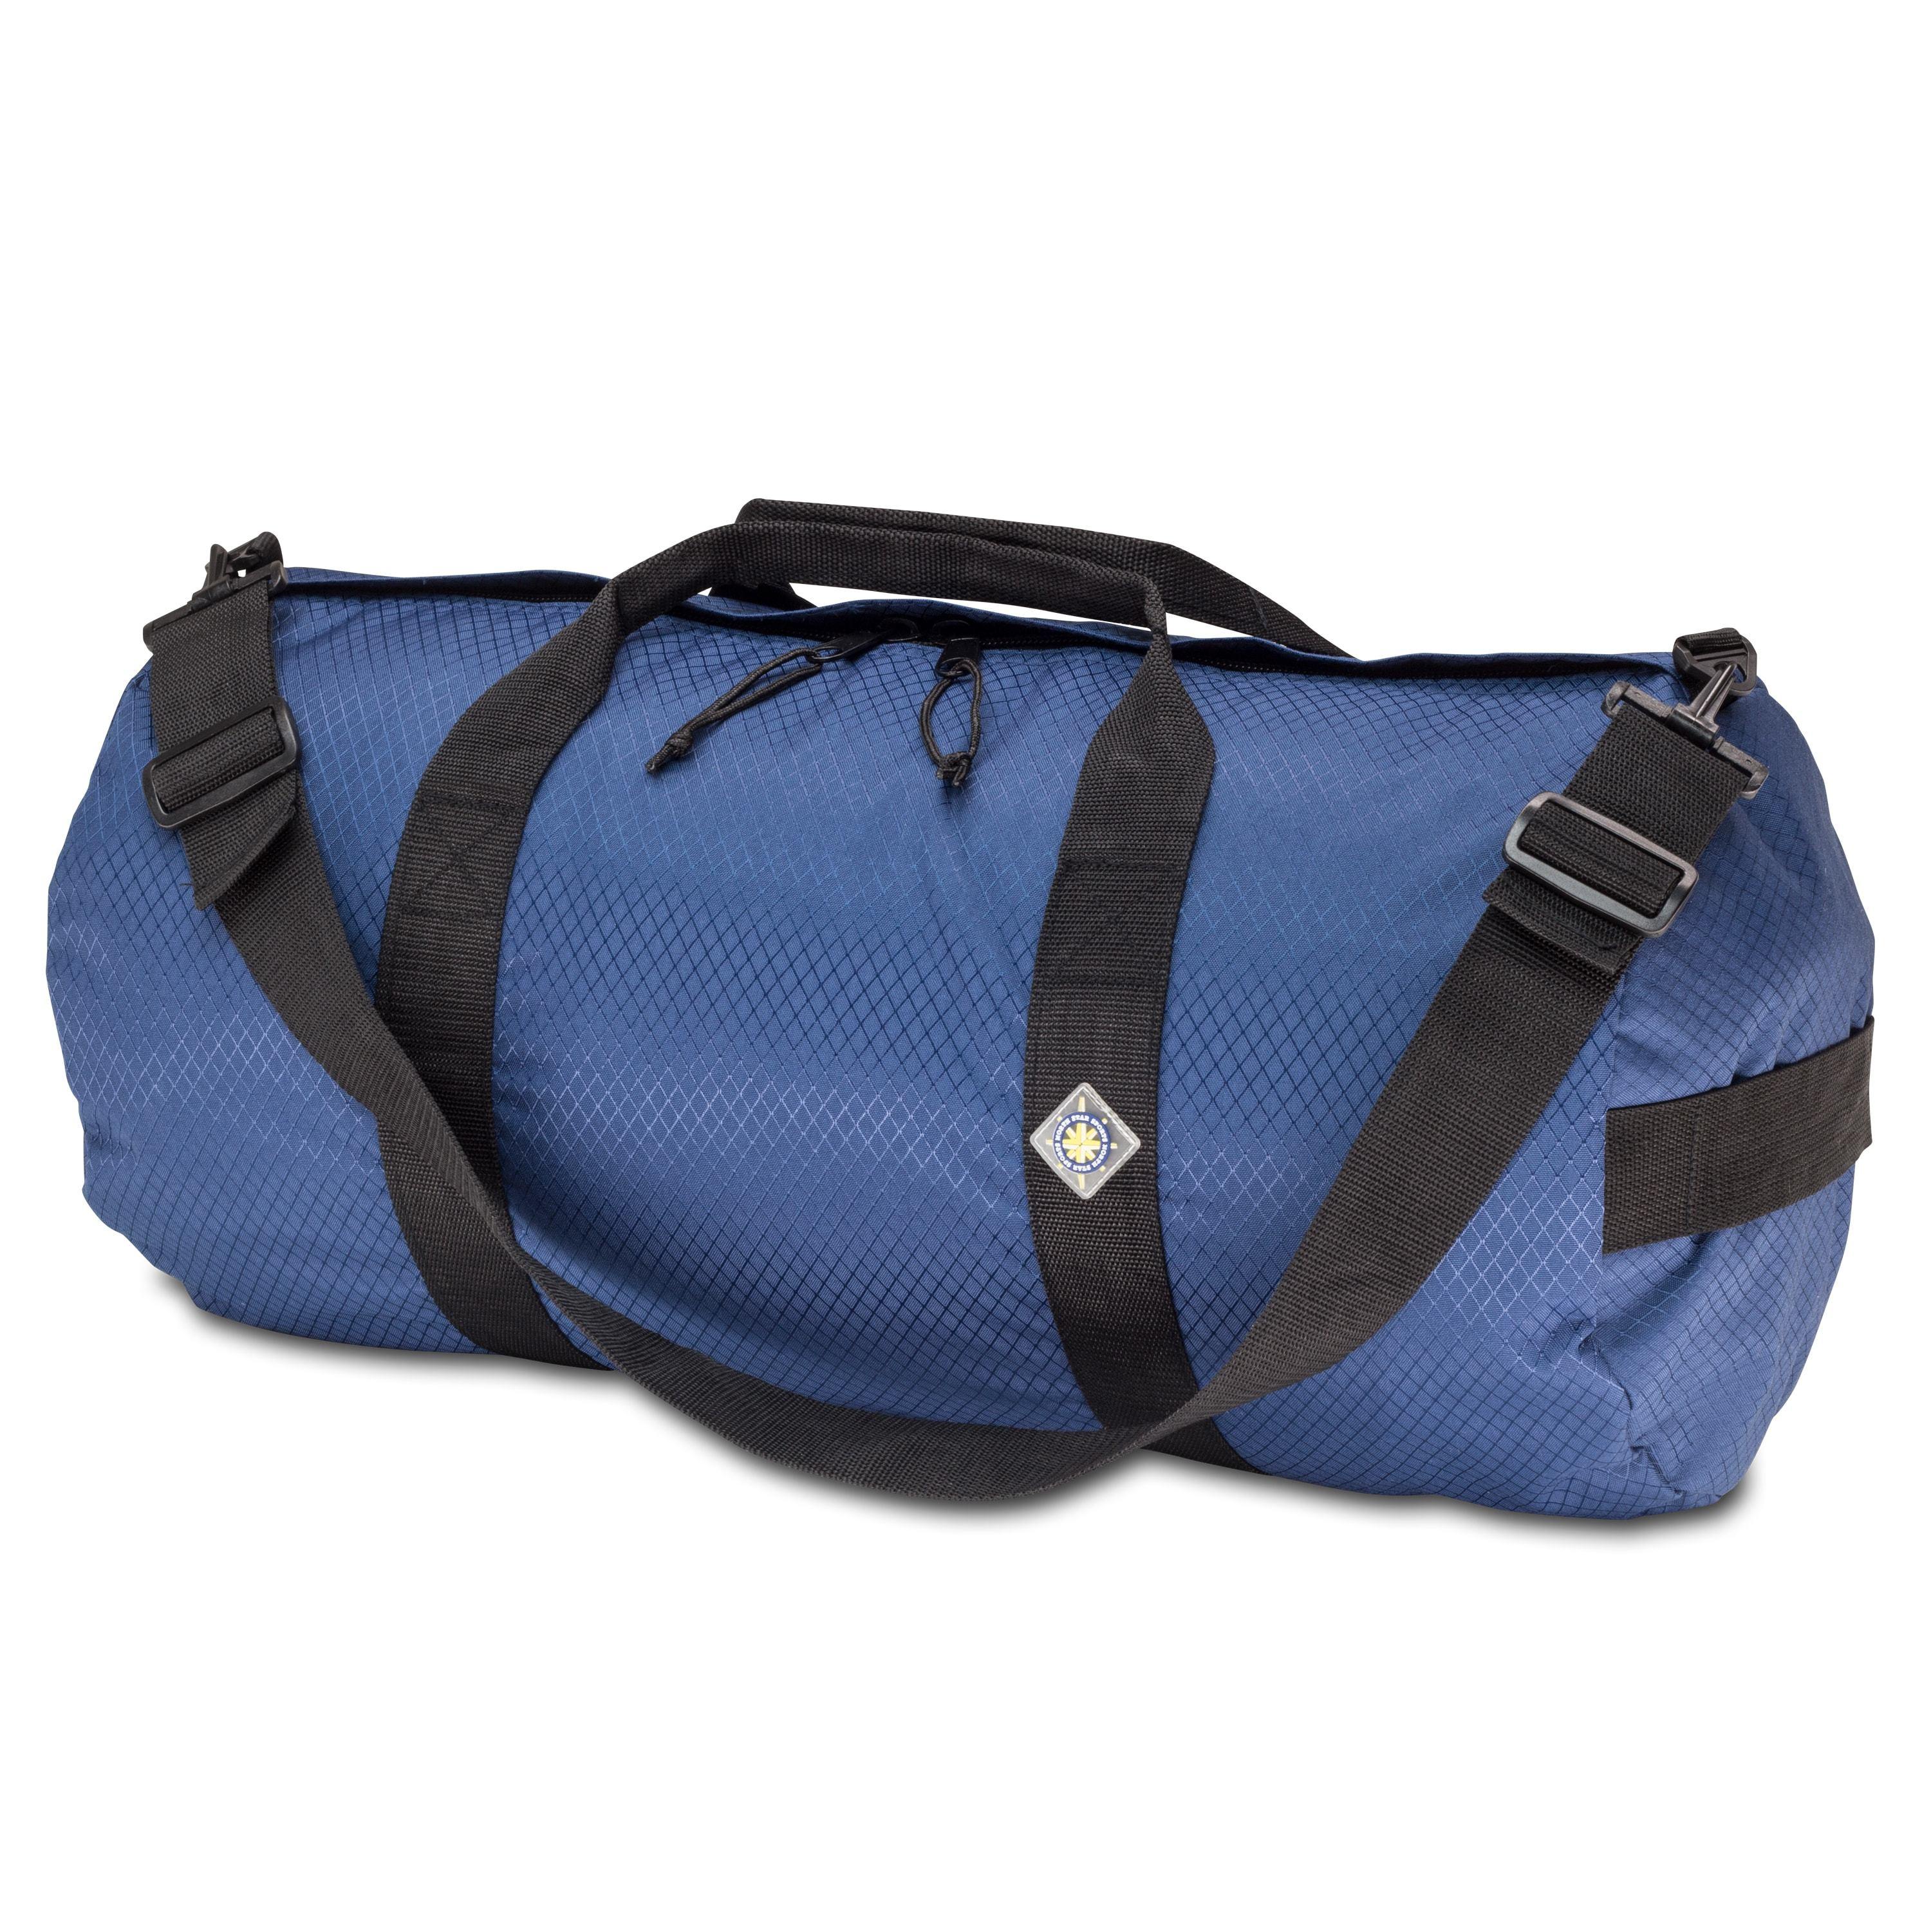 Studio photo the Pacific Blue SD1224DLX Standard Duffle by Northstar Bags. 44 liter duffel with diamond ripstop fabric, thick webbing straps, and a large format metal zipper. Guaranteed for life.